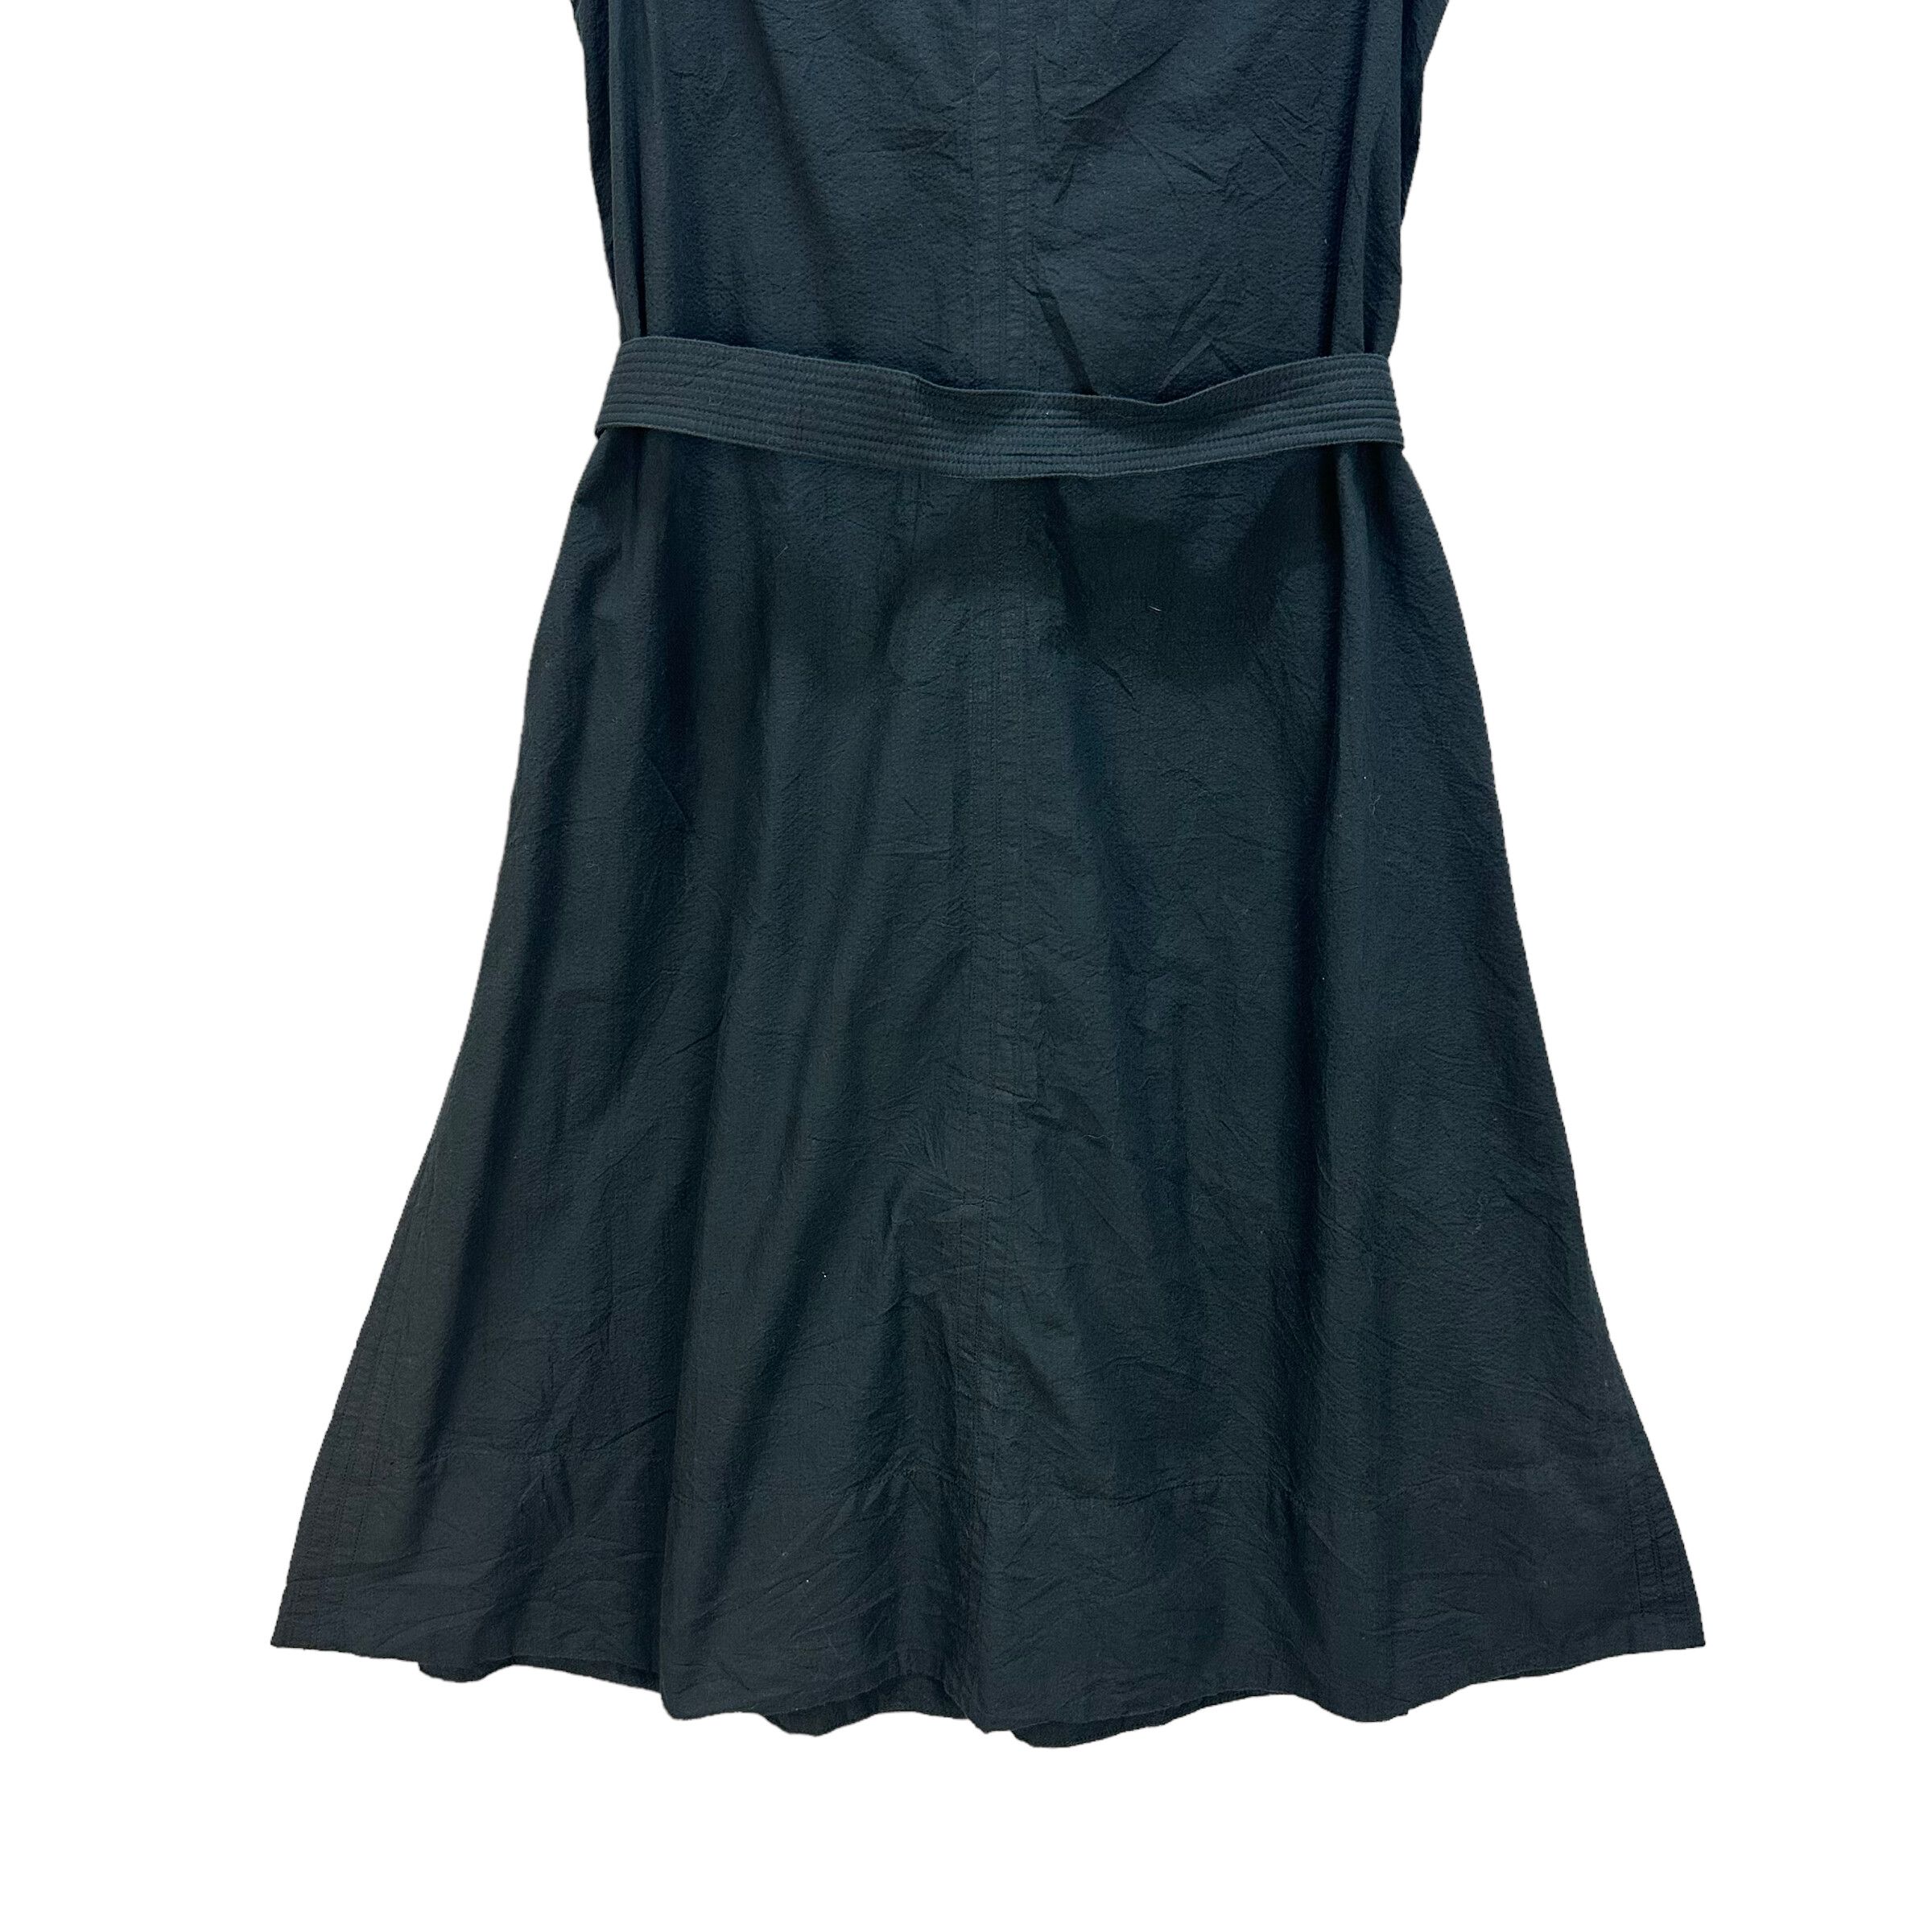 UNIQLO AND LEMAIRE DRESS #7887-188 - 10